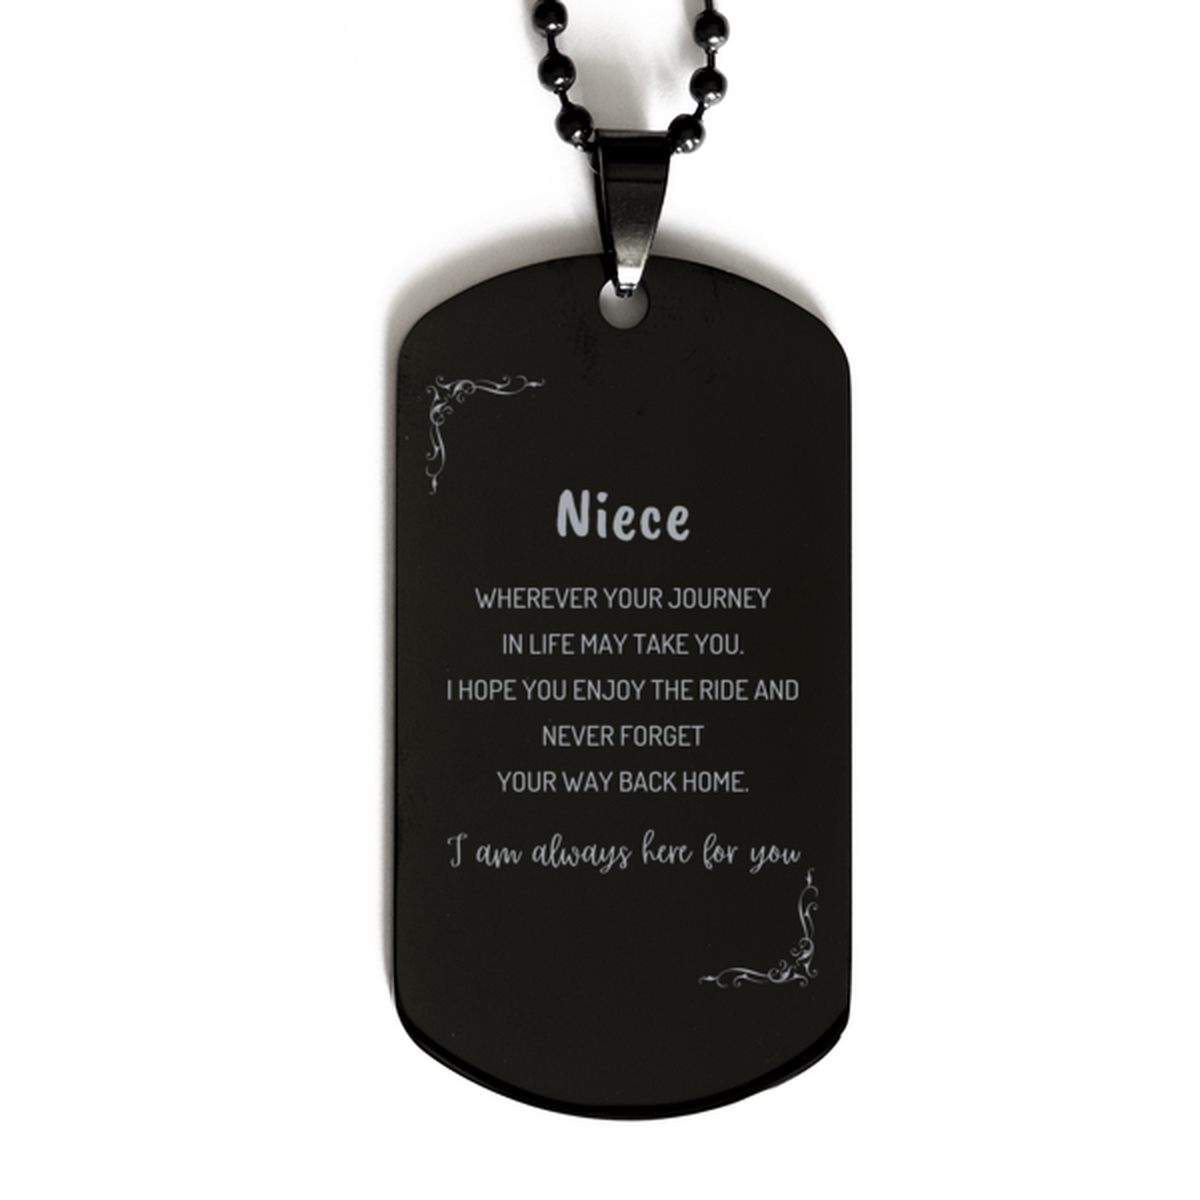 Niece wherever your journey in life may take you, I am always here for you Niece Black Dog Tag, Awesome Christmas Gifts For Niece, Niece Birthday Gifts for Men Women Family Loved One